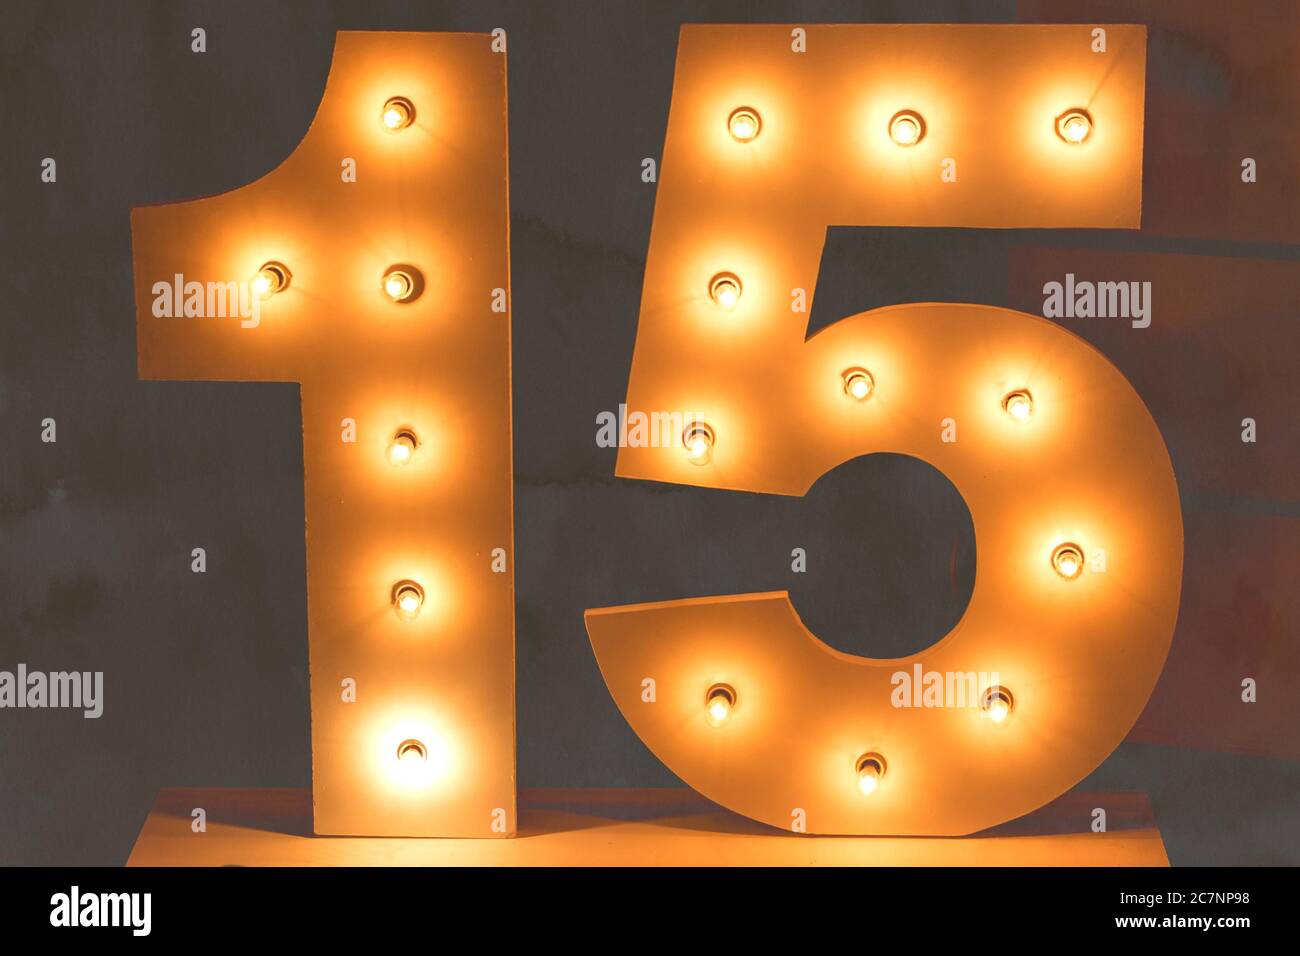 Fifteen number with bulb led lights. Number isolated. Decoration for teenager parties. Decorative number isolated. 15 bulb number. Stock Photo